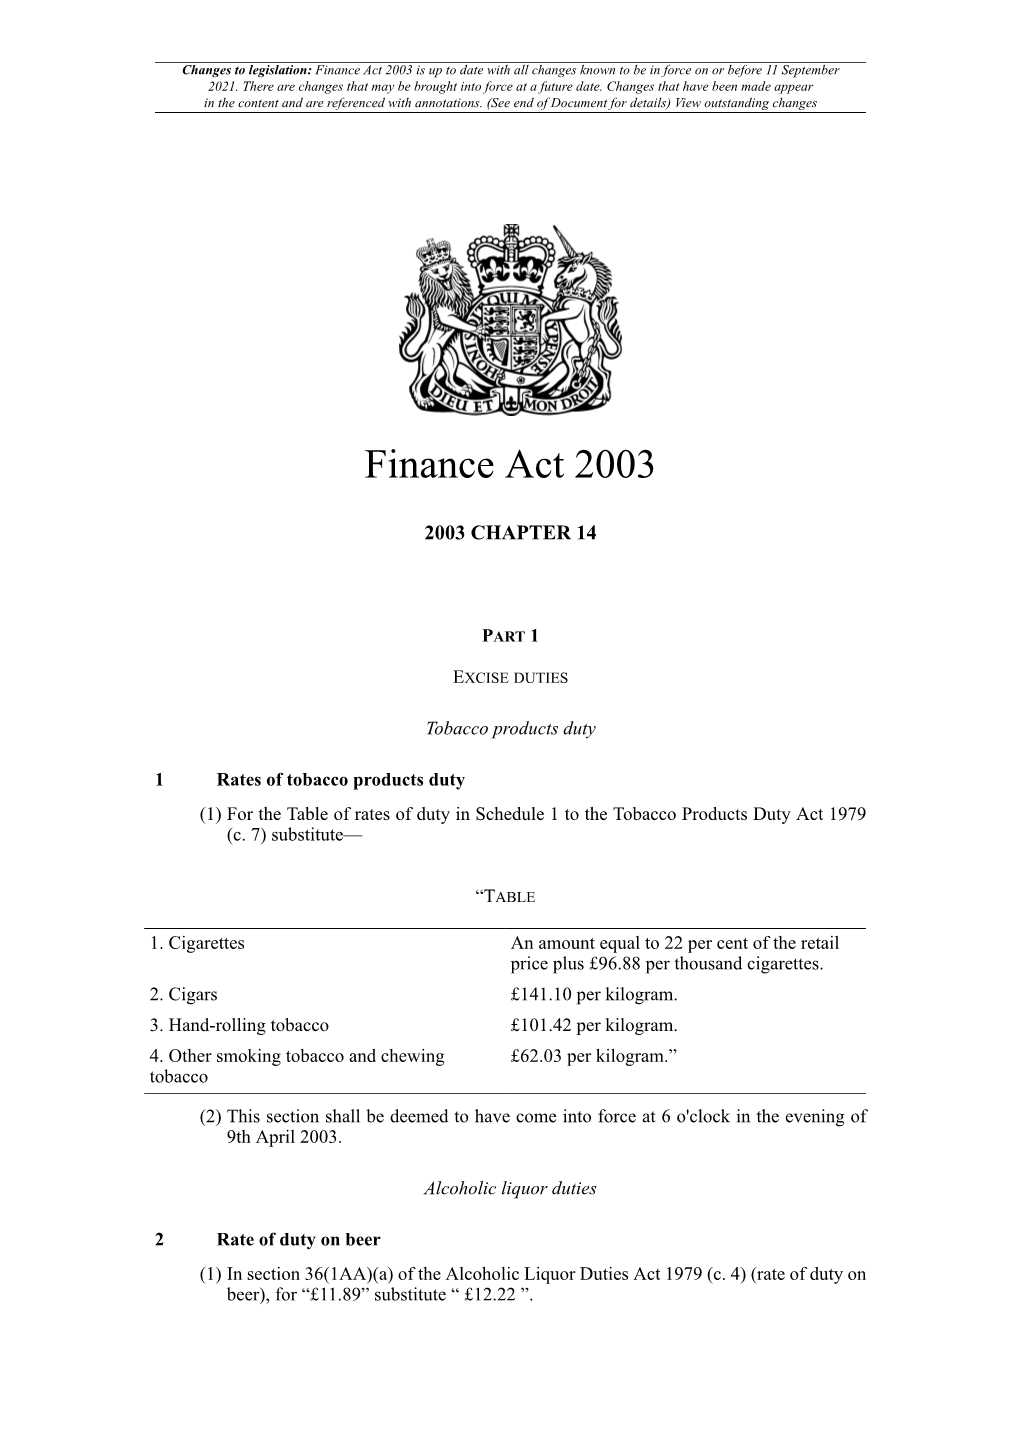 Finance Act 2003 Is up to Date with All Changes Known to Be in Force on Or Before 11 September 2021